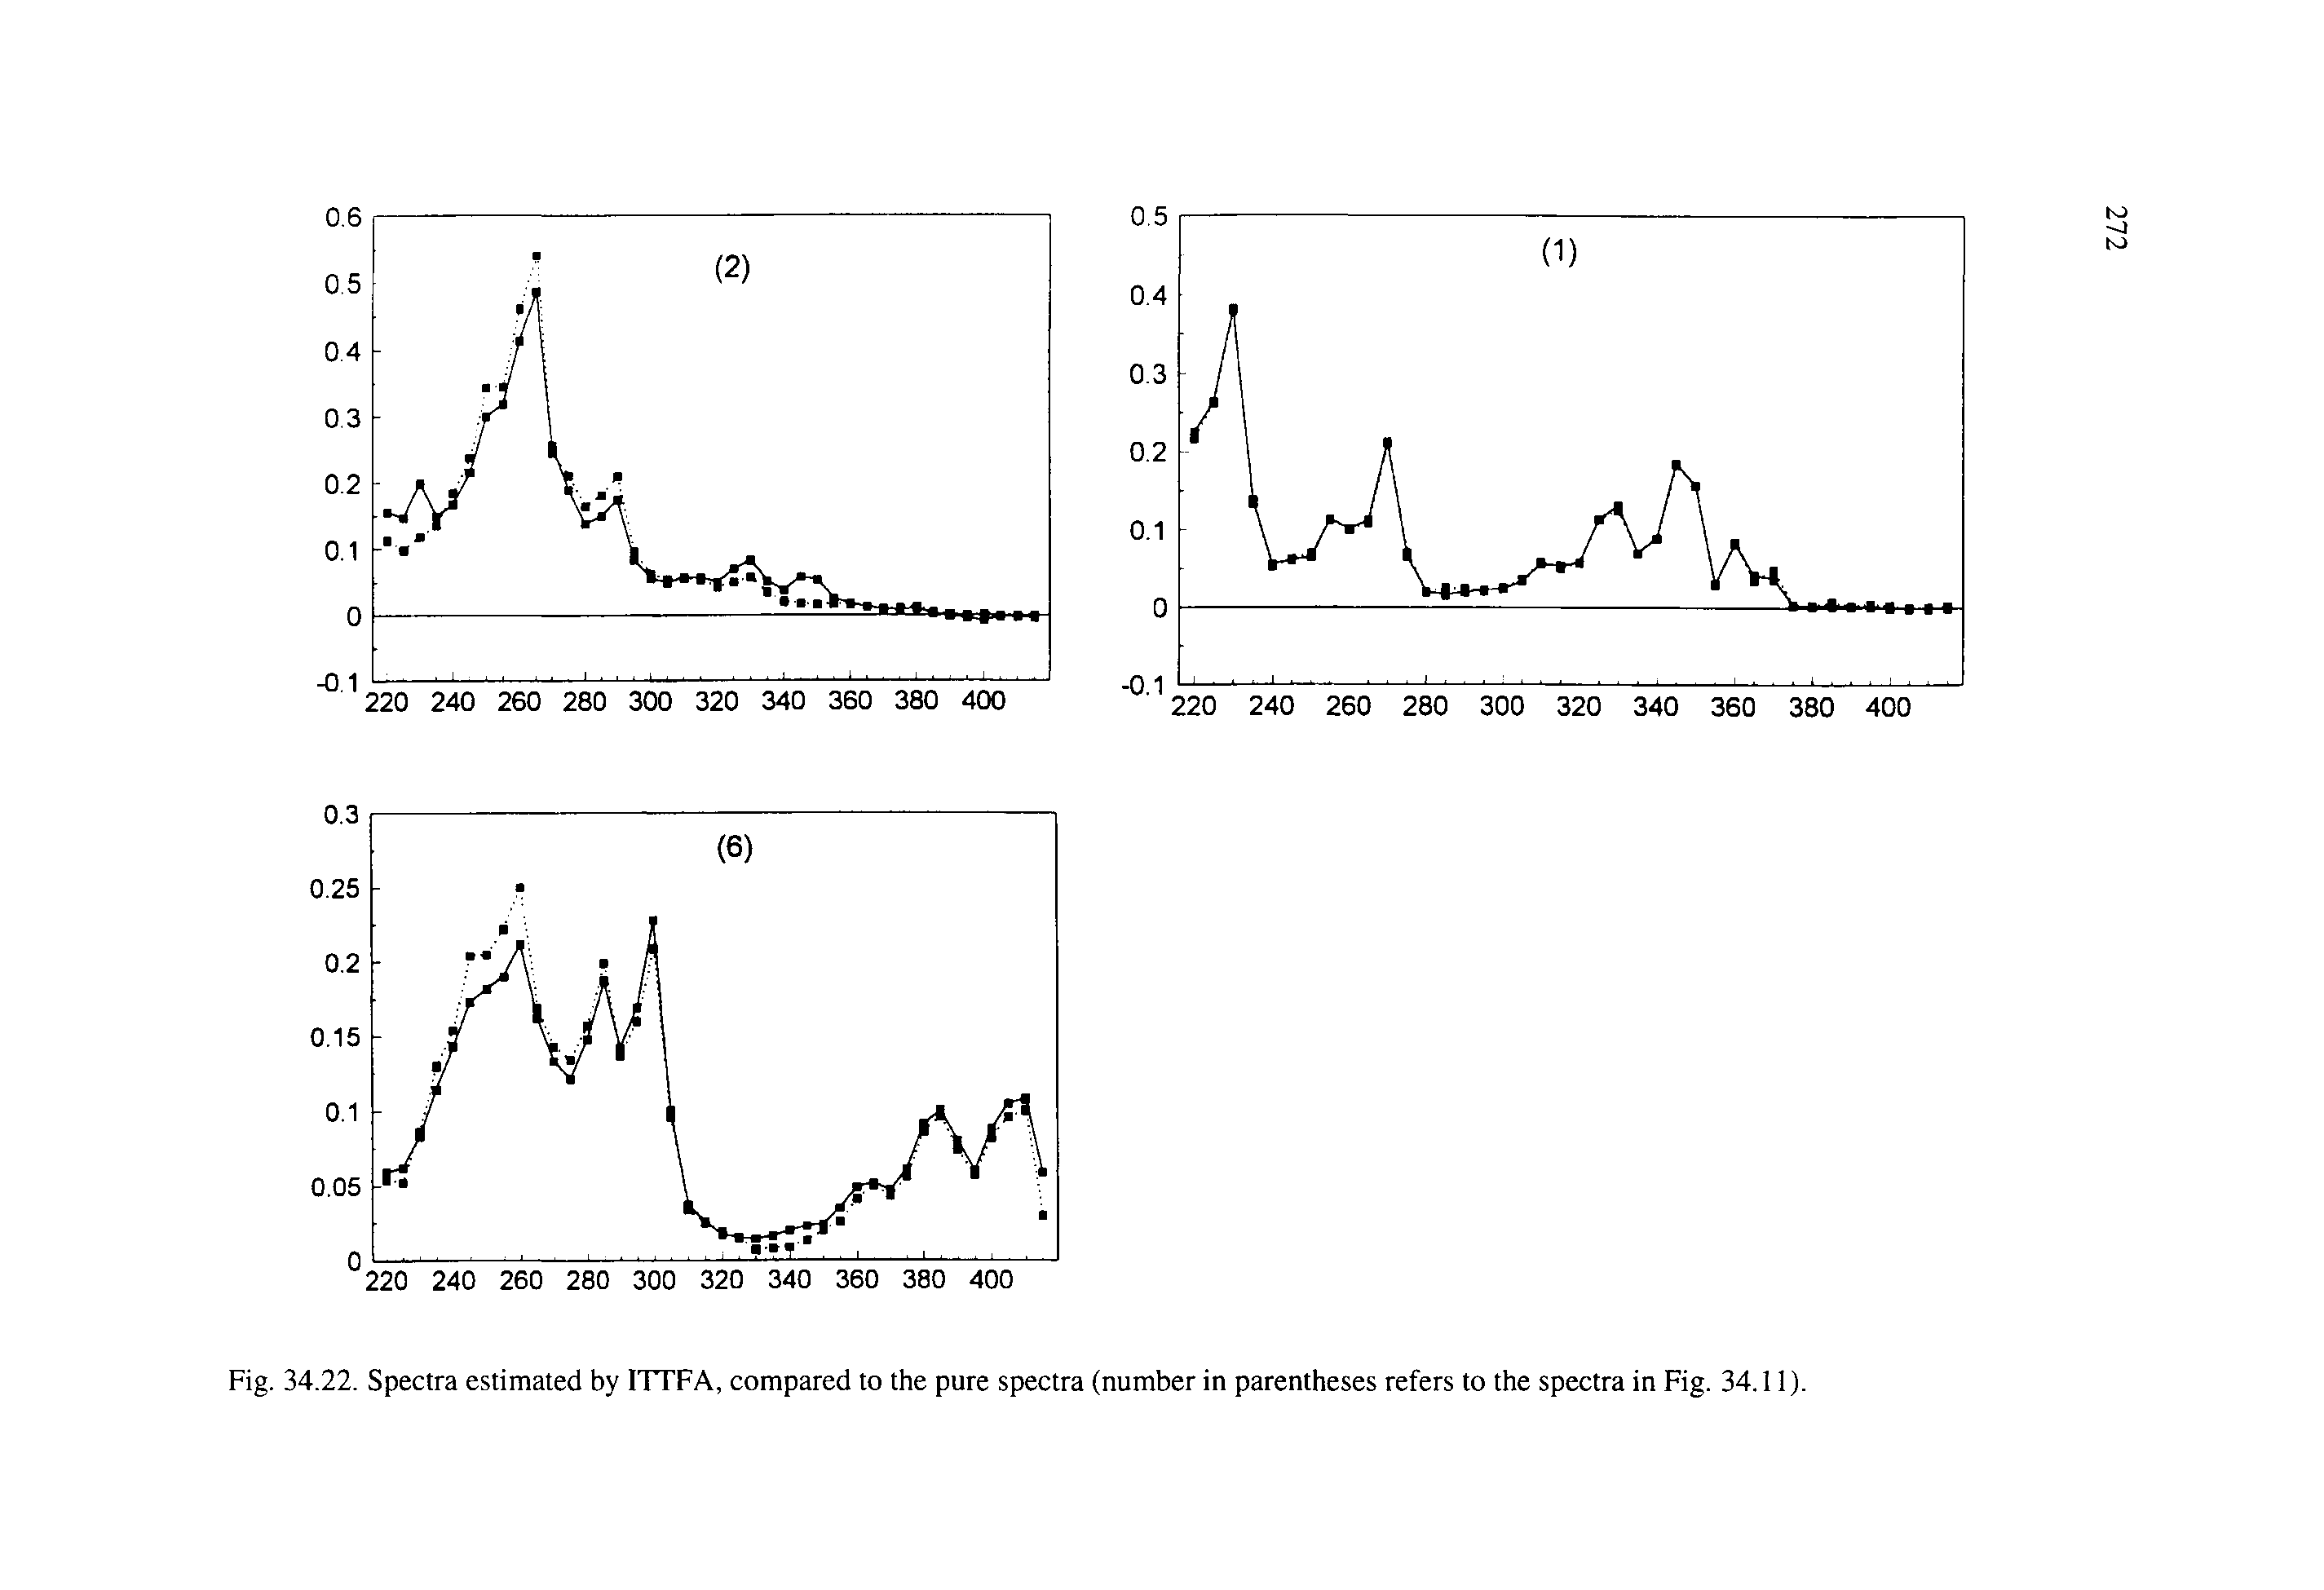 Fig. 34.22. Spectra estimated by ITTFA, compared to the pure spectra (number in parentheses refers to the spectra in Fig. 34.11).